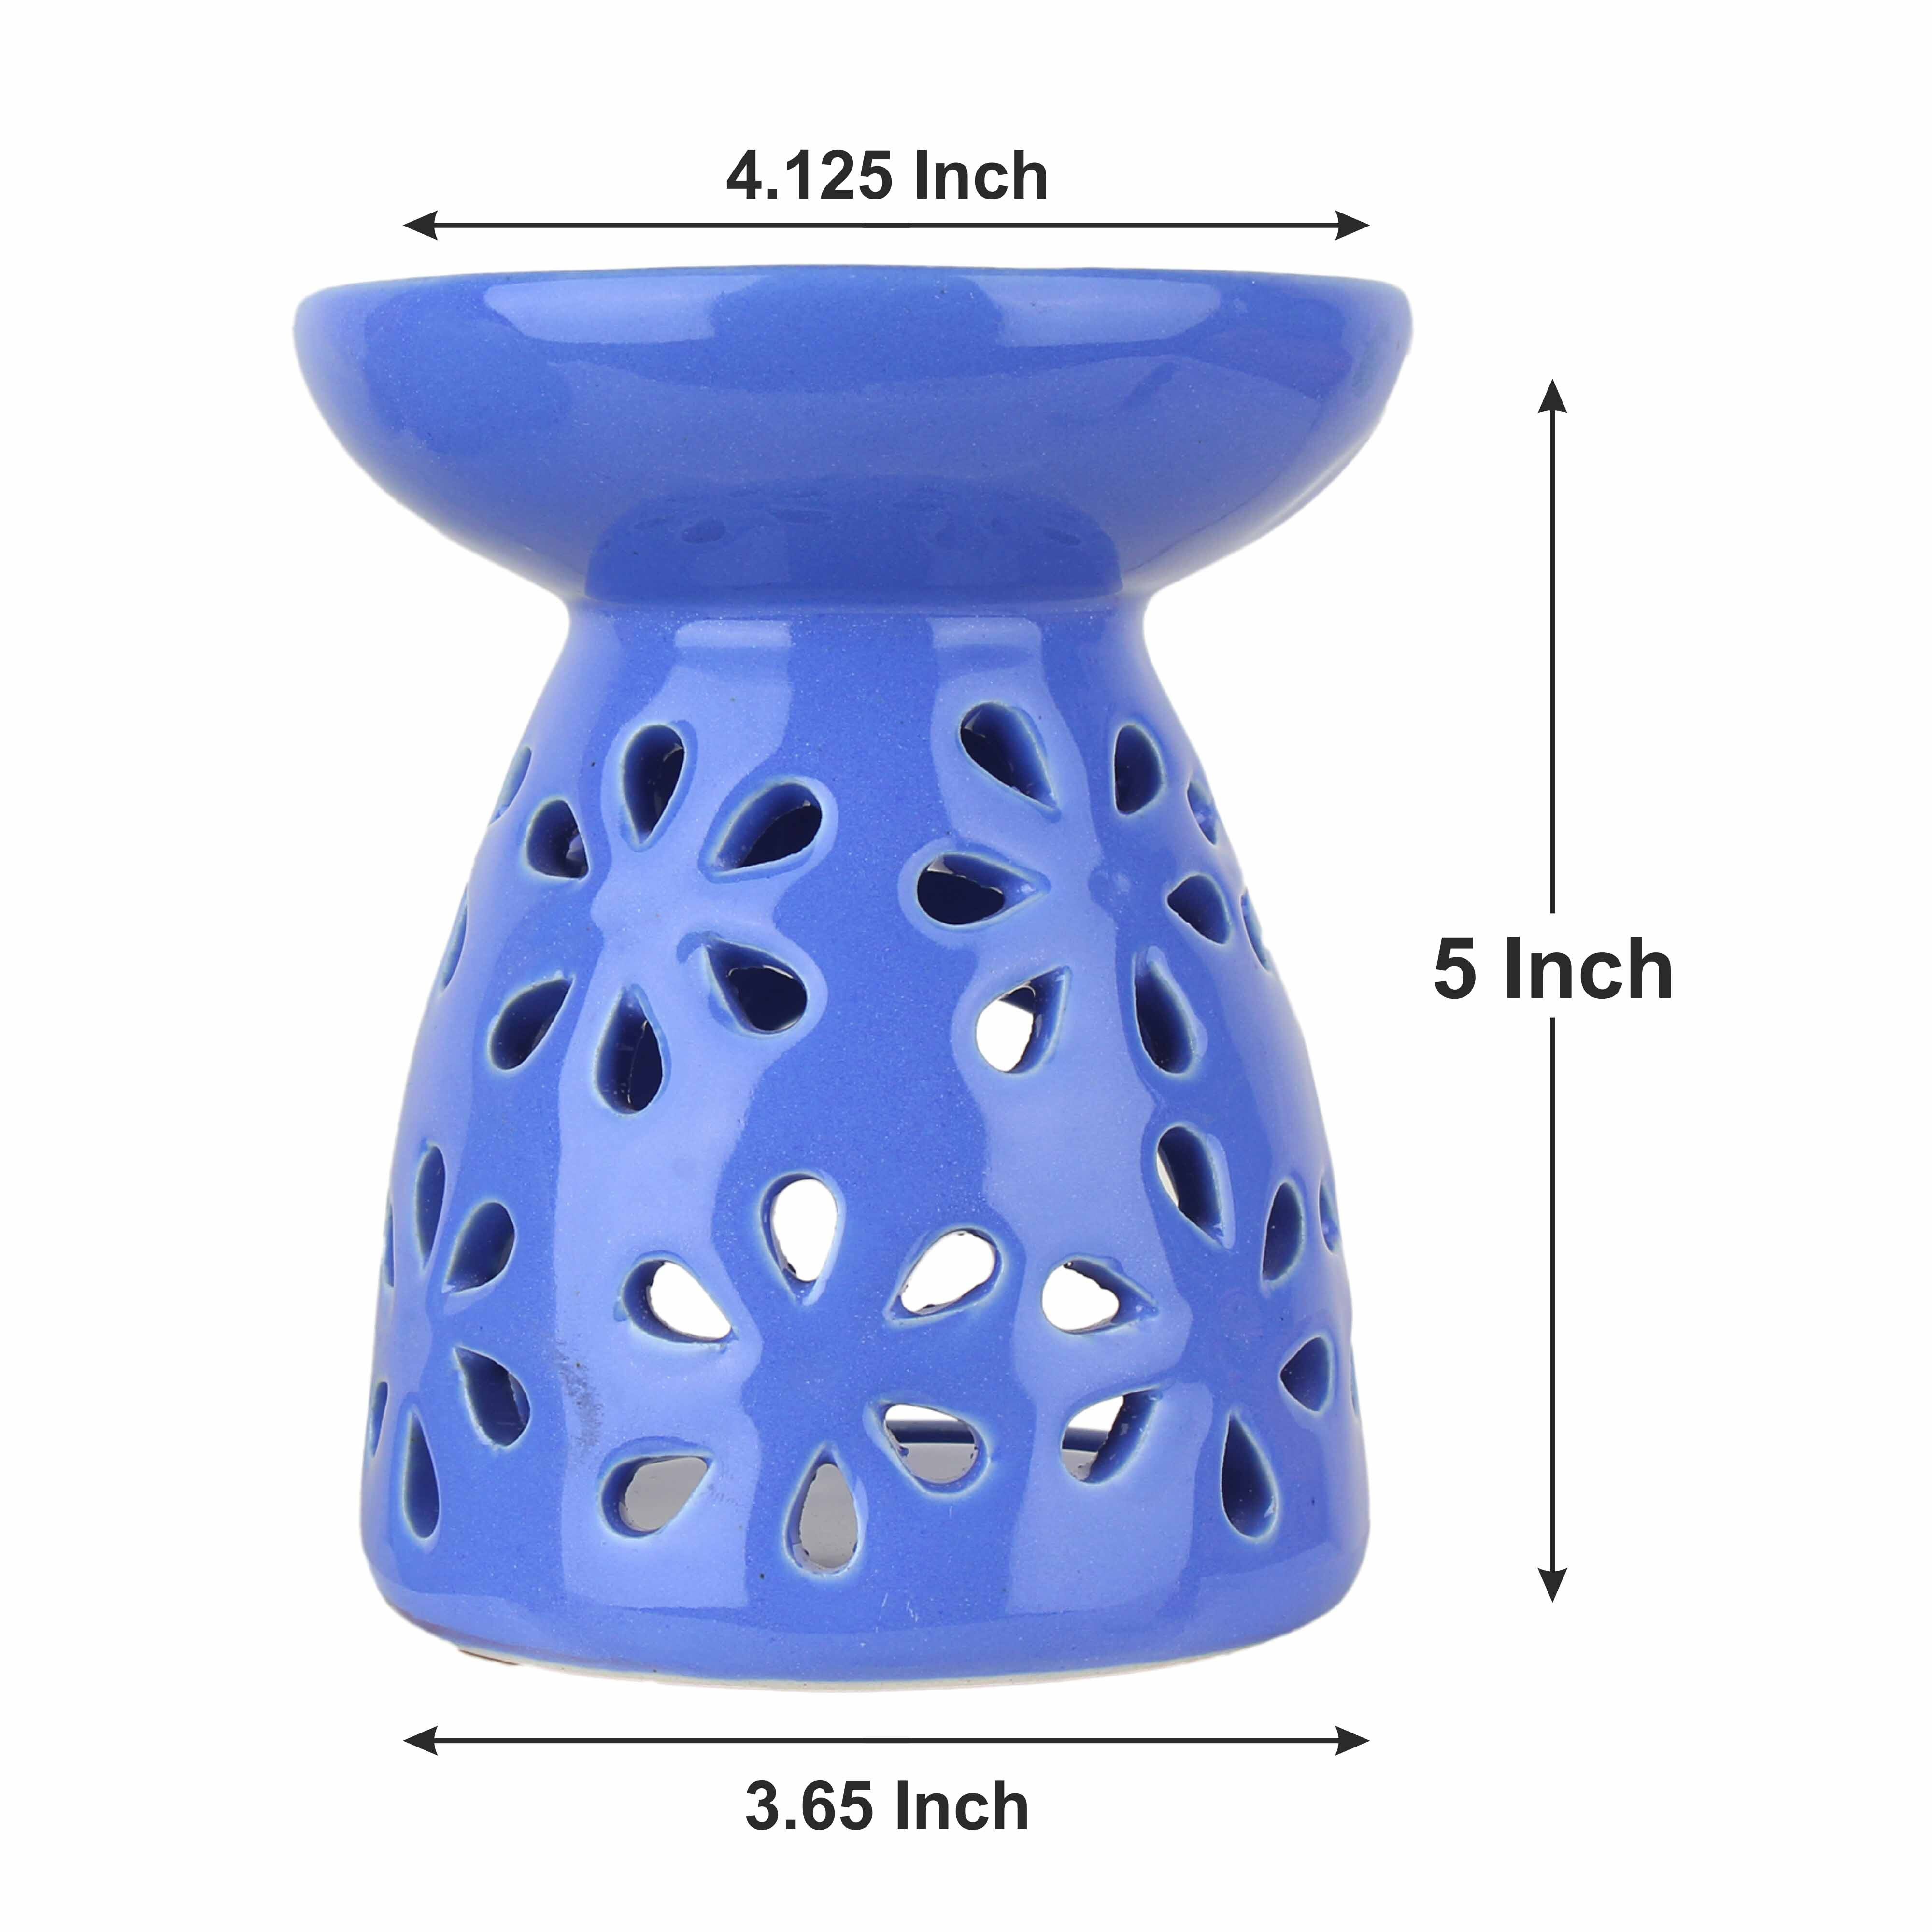 Asian Aura Ceramic Aromatic Oil Diffuser with 2 oil bottles AA-CB-0042BLUE